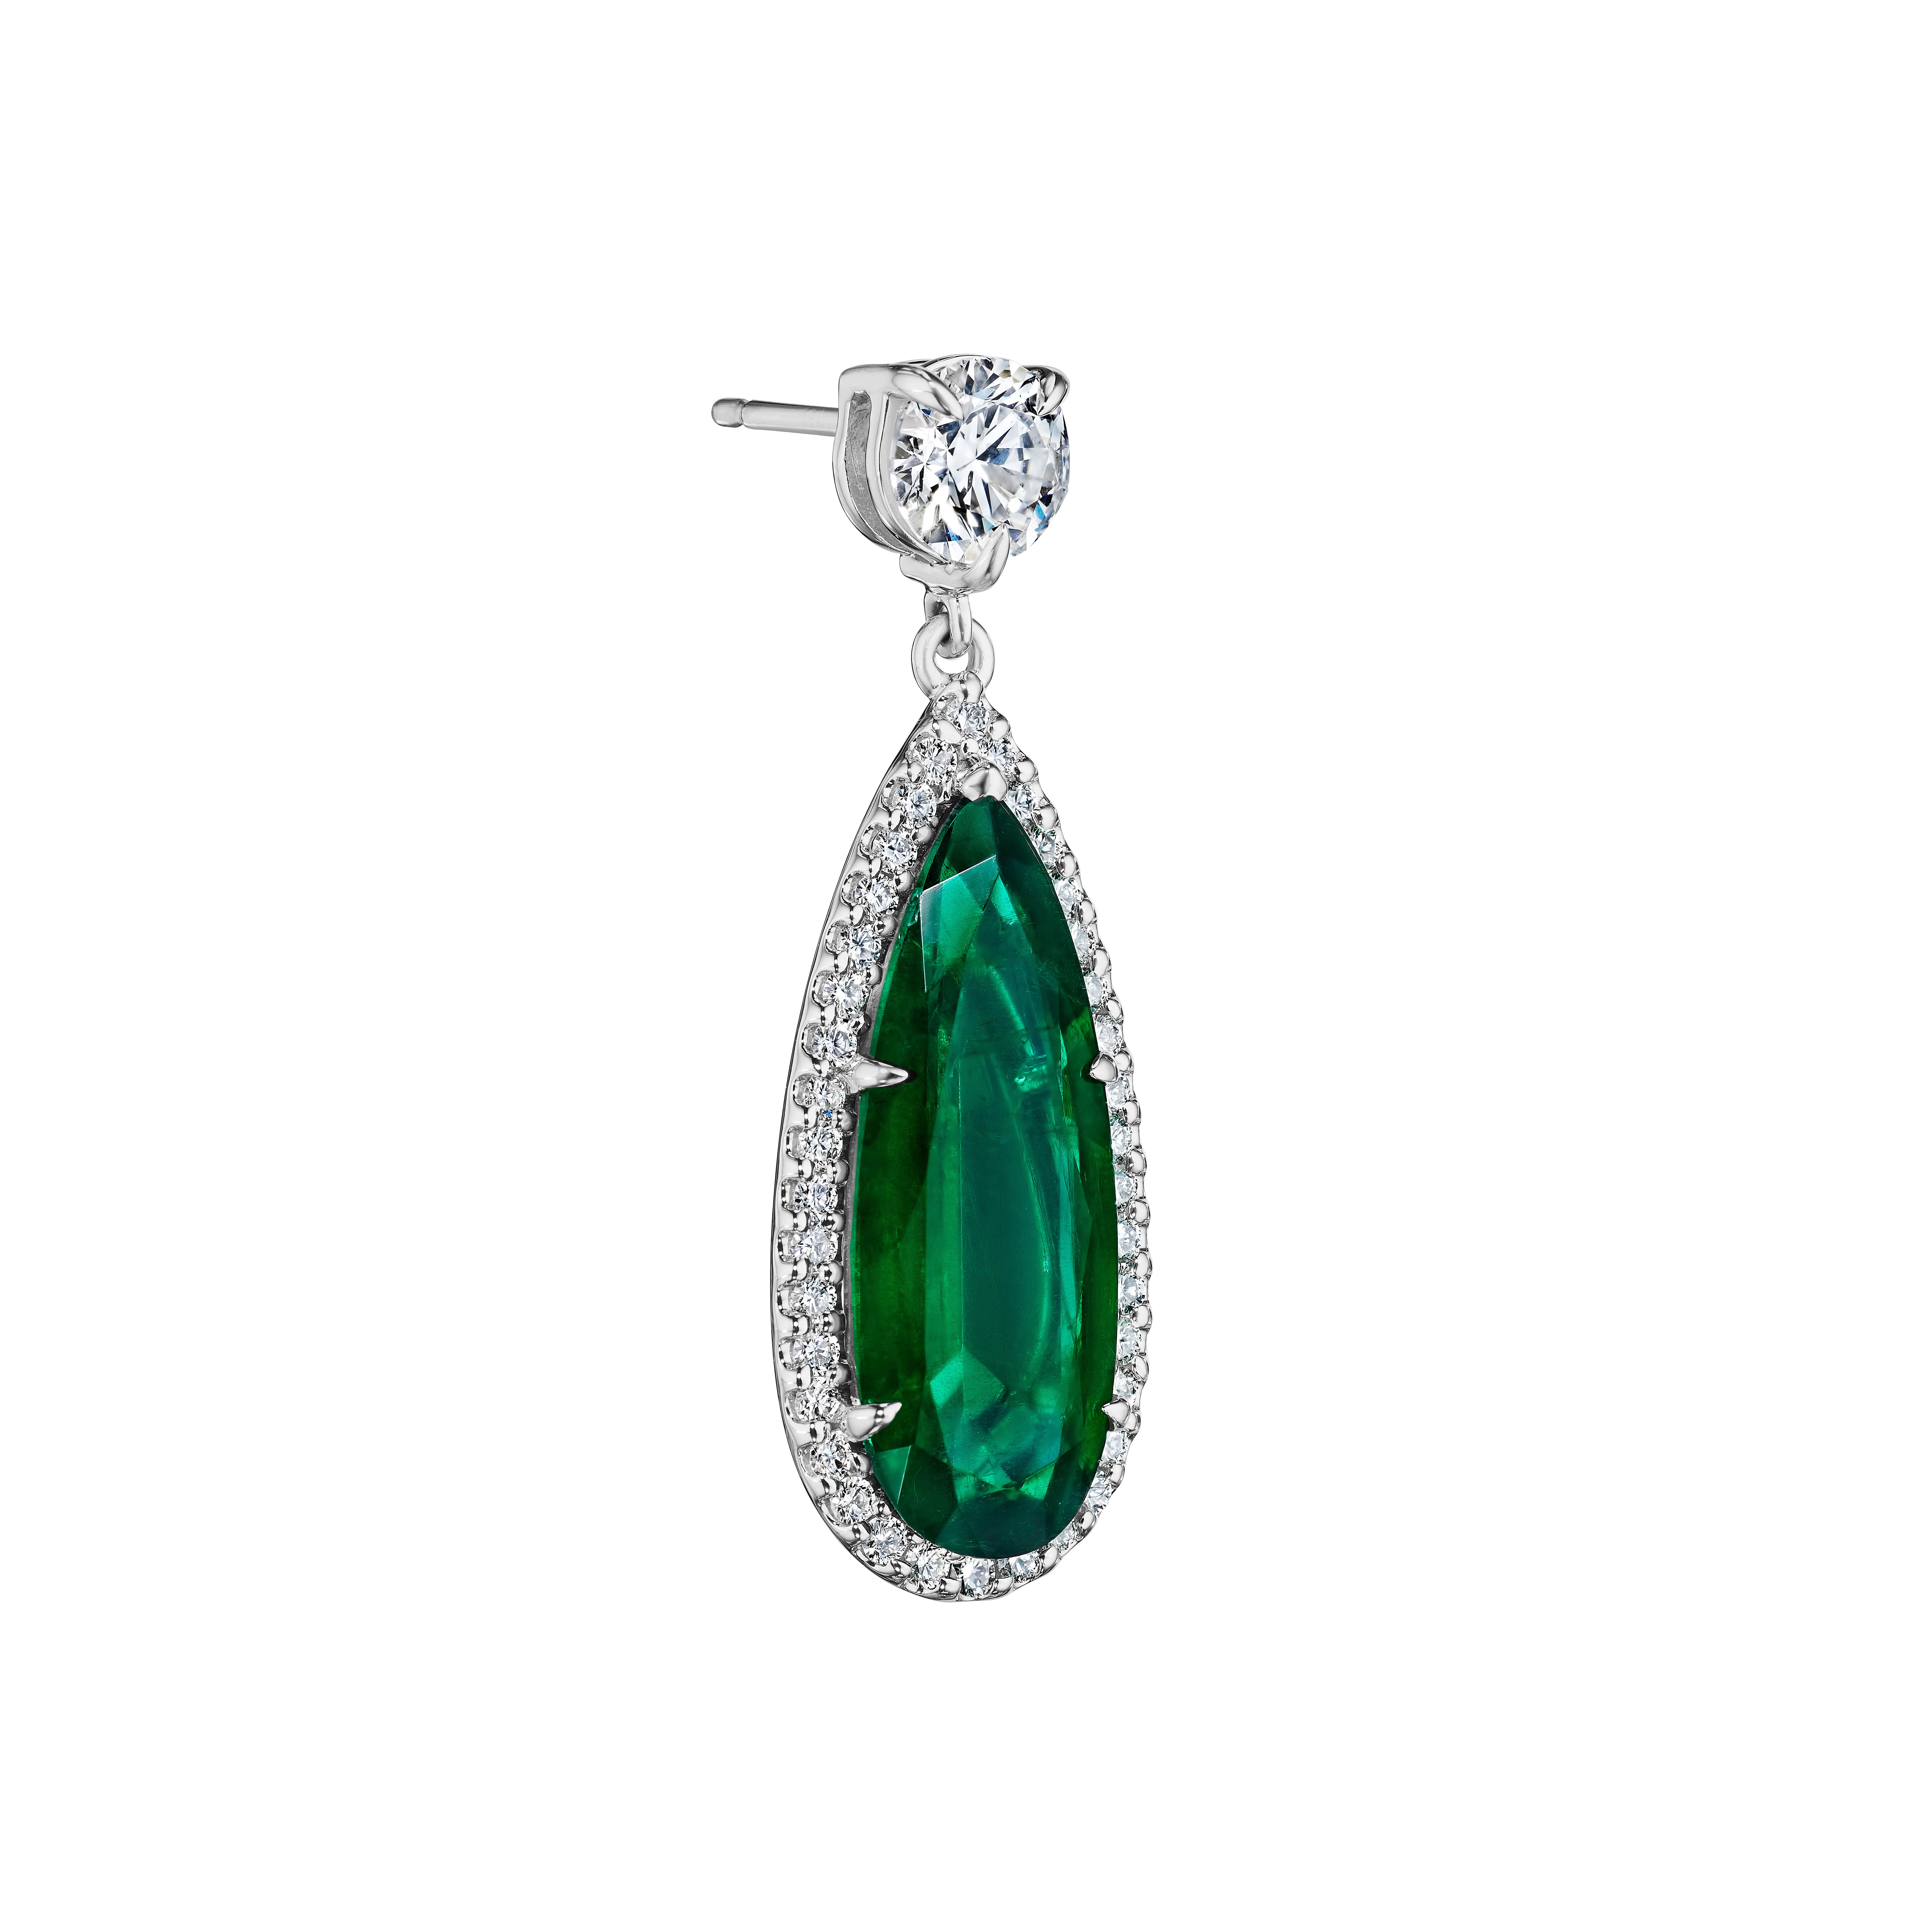 Pear Cut 12.87ct Pear Shape Emerald & Round Diamond Earrings in 18KT White Gold For Sale